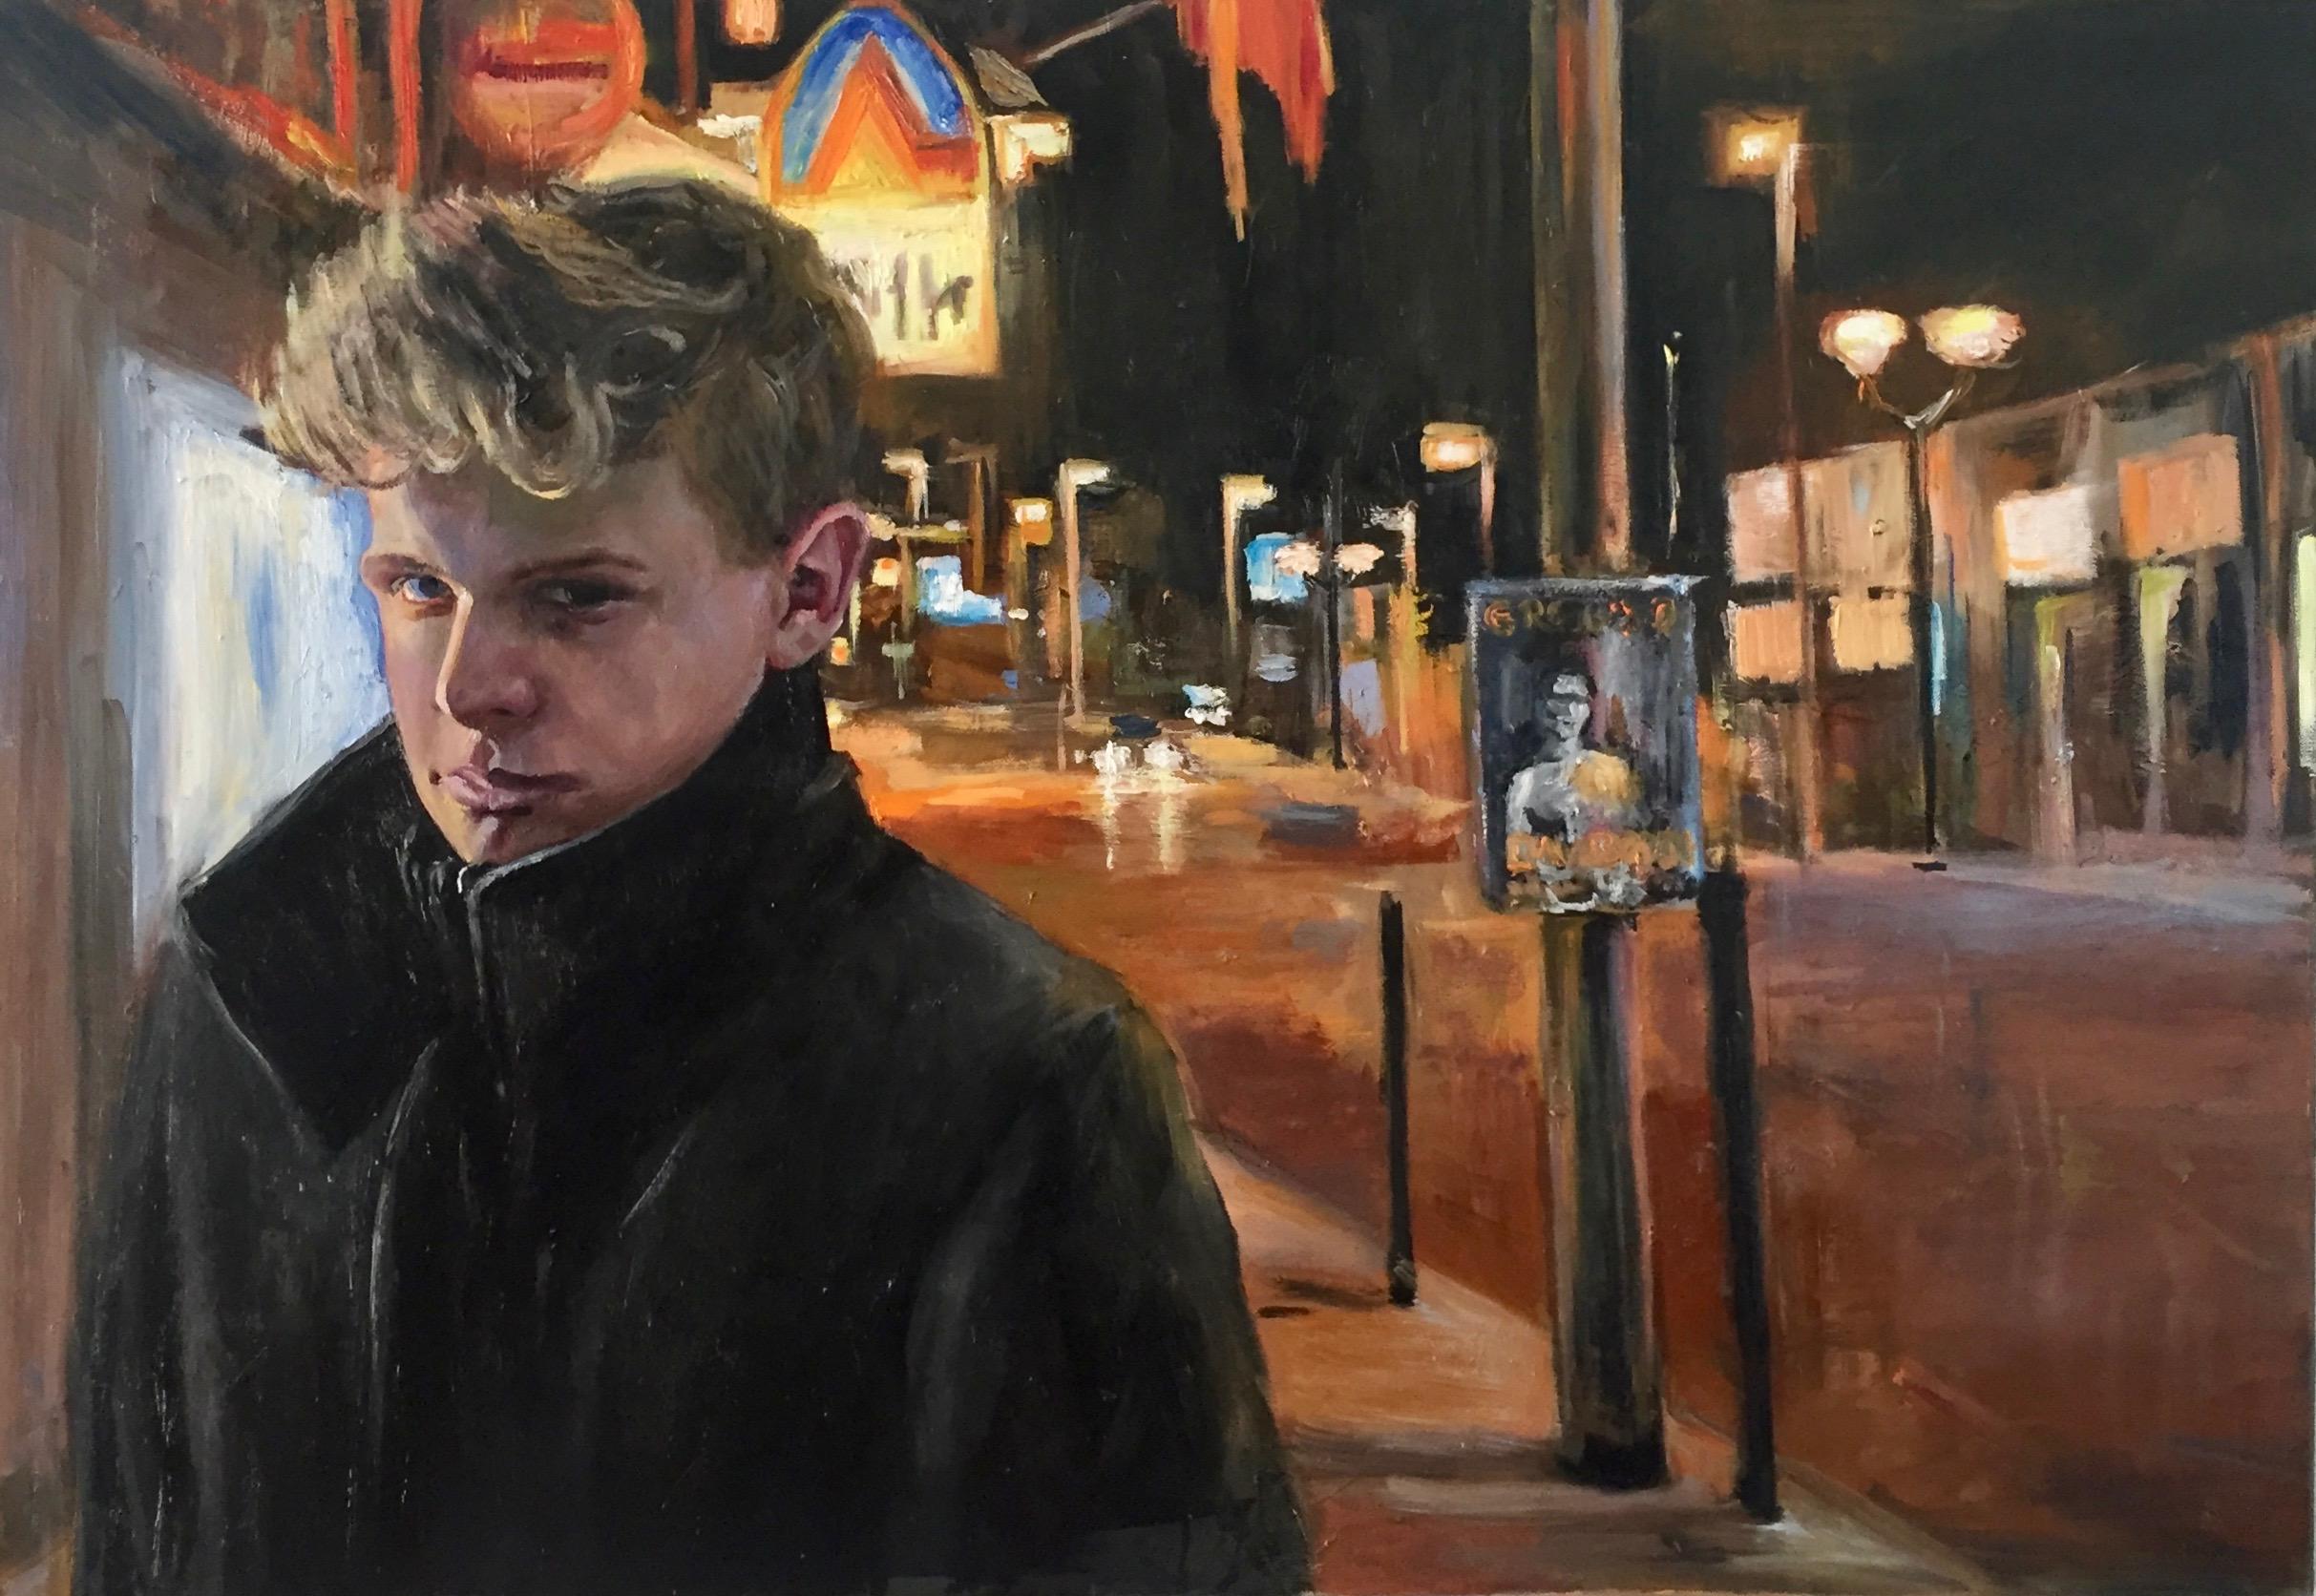 David van der Linden Portrait Painting - Golden Years, 21st-Century Dutch Contemporary Oil Painting of a Boy in the Night